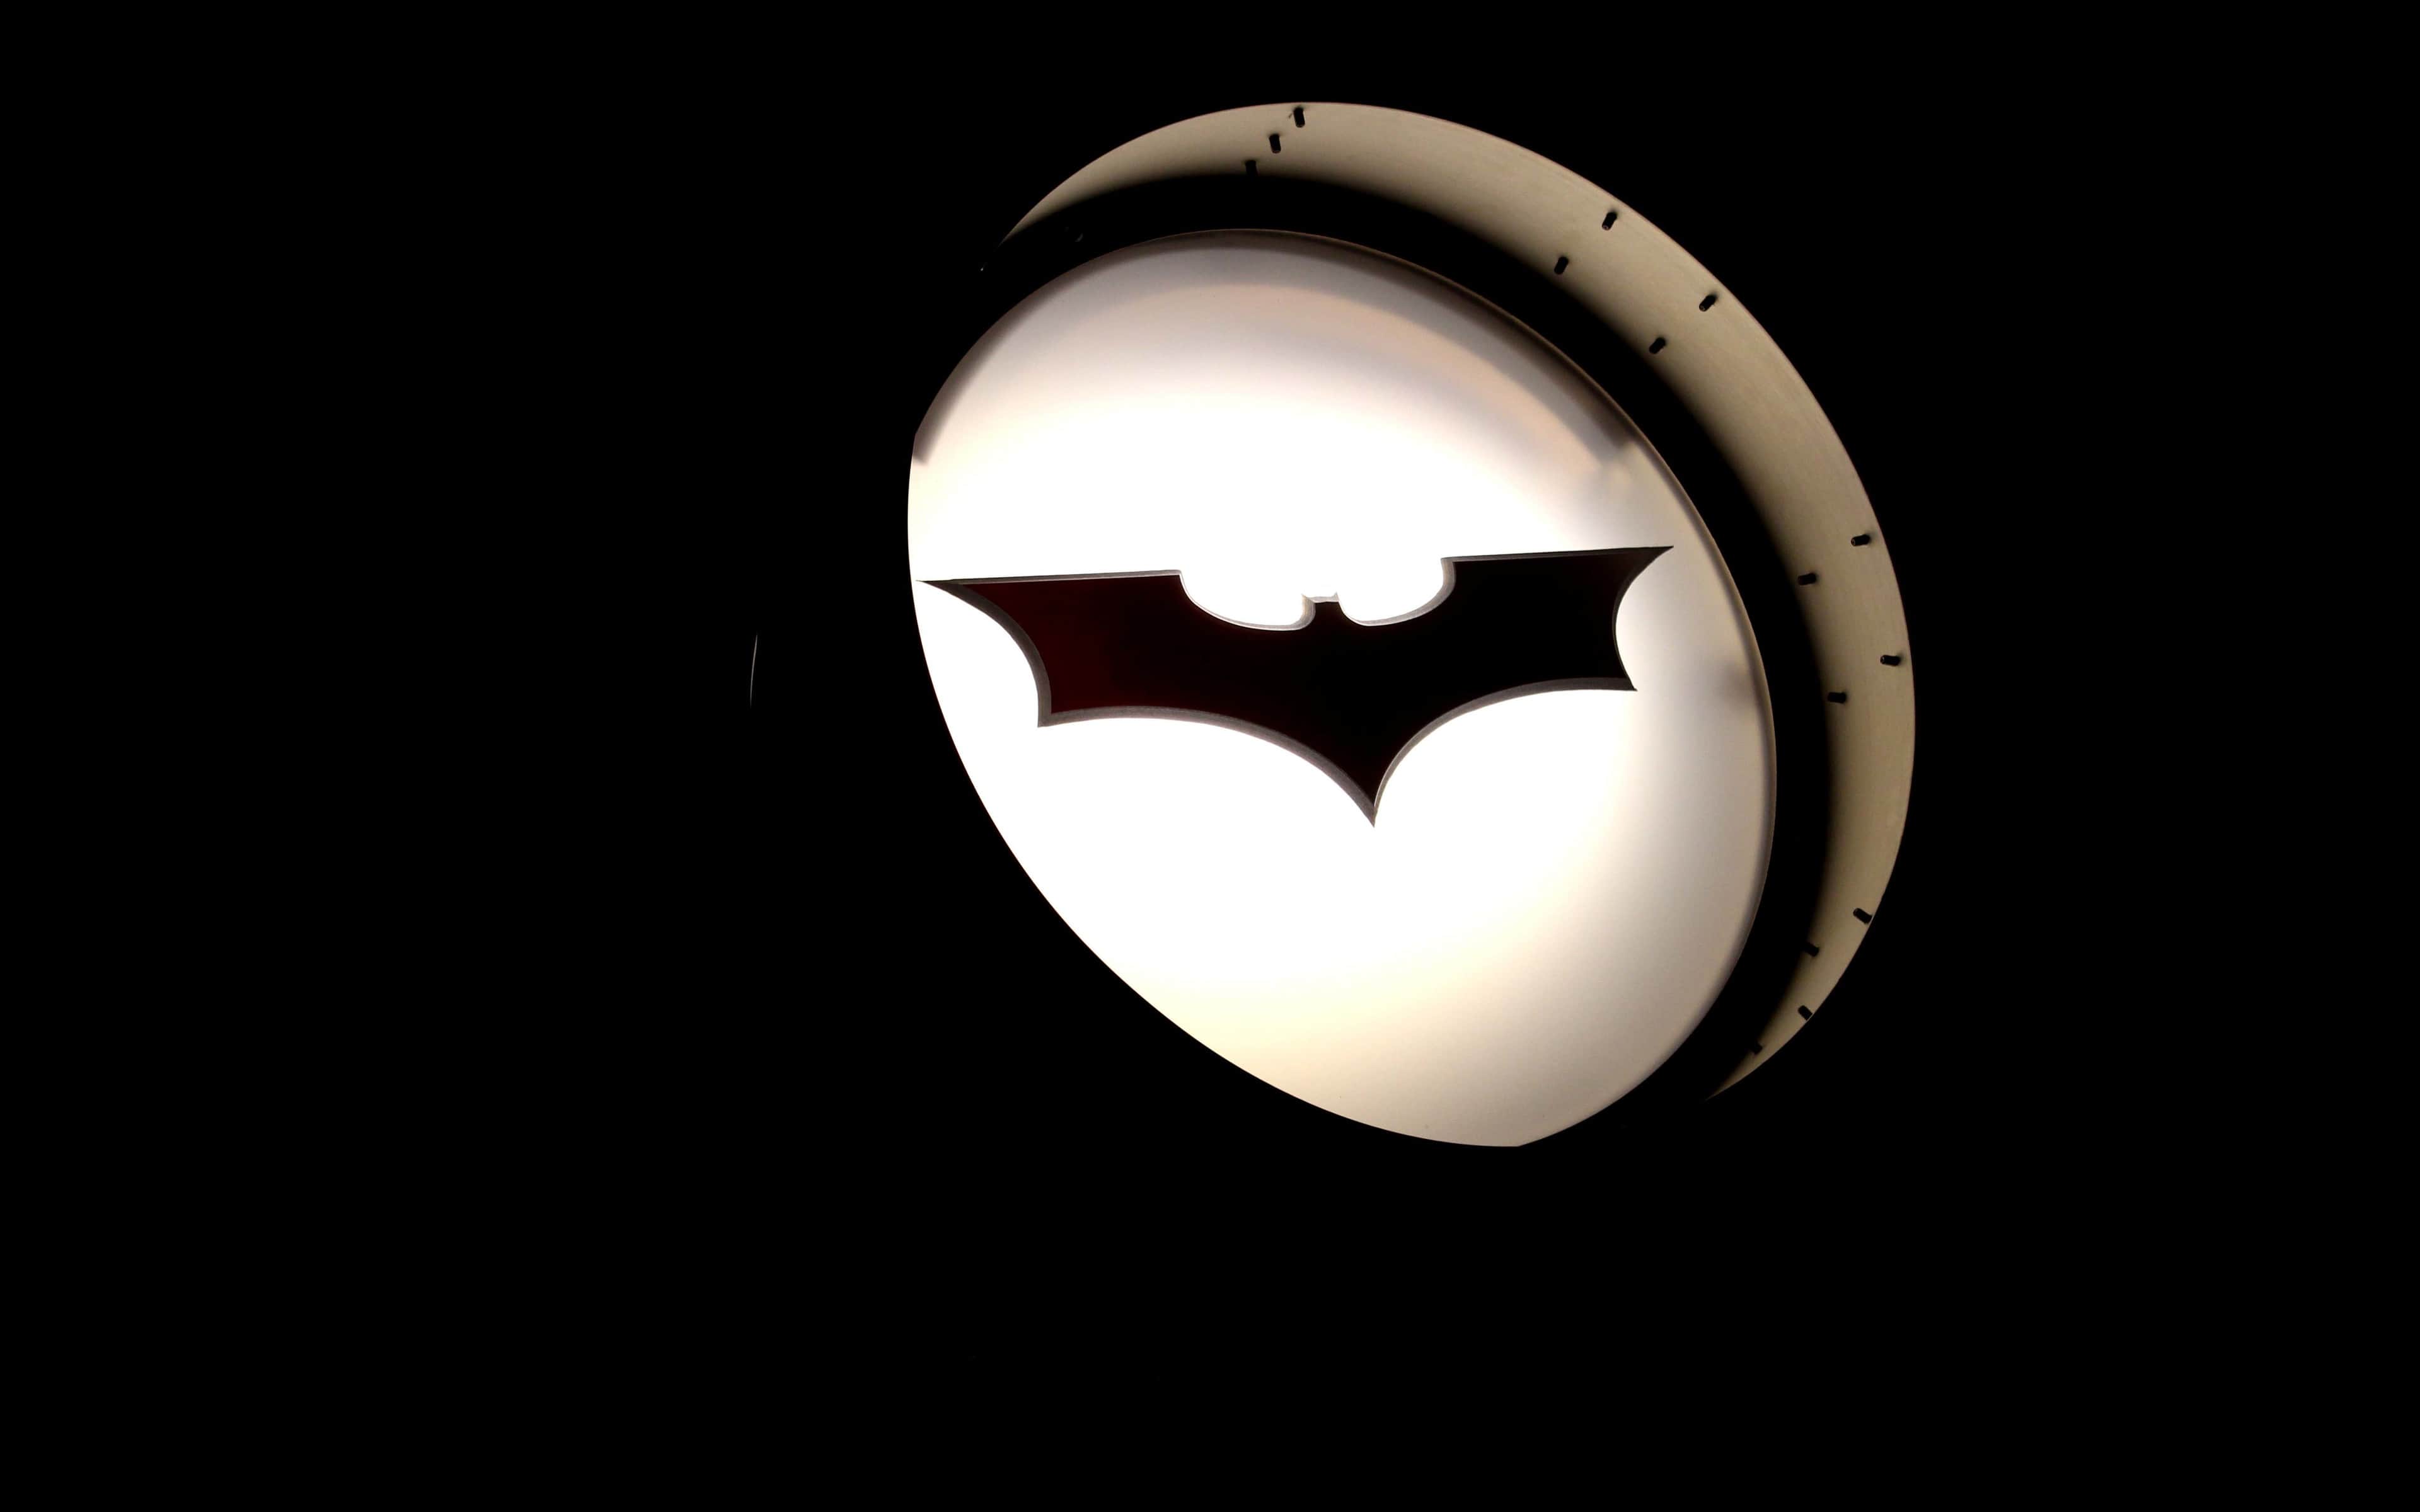 Bat Signal Black And White Wallpaper and Free